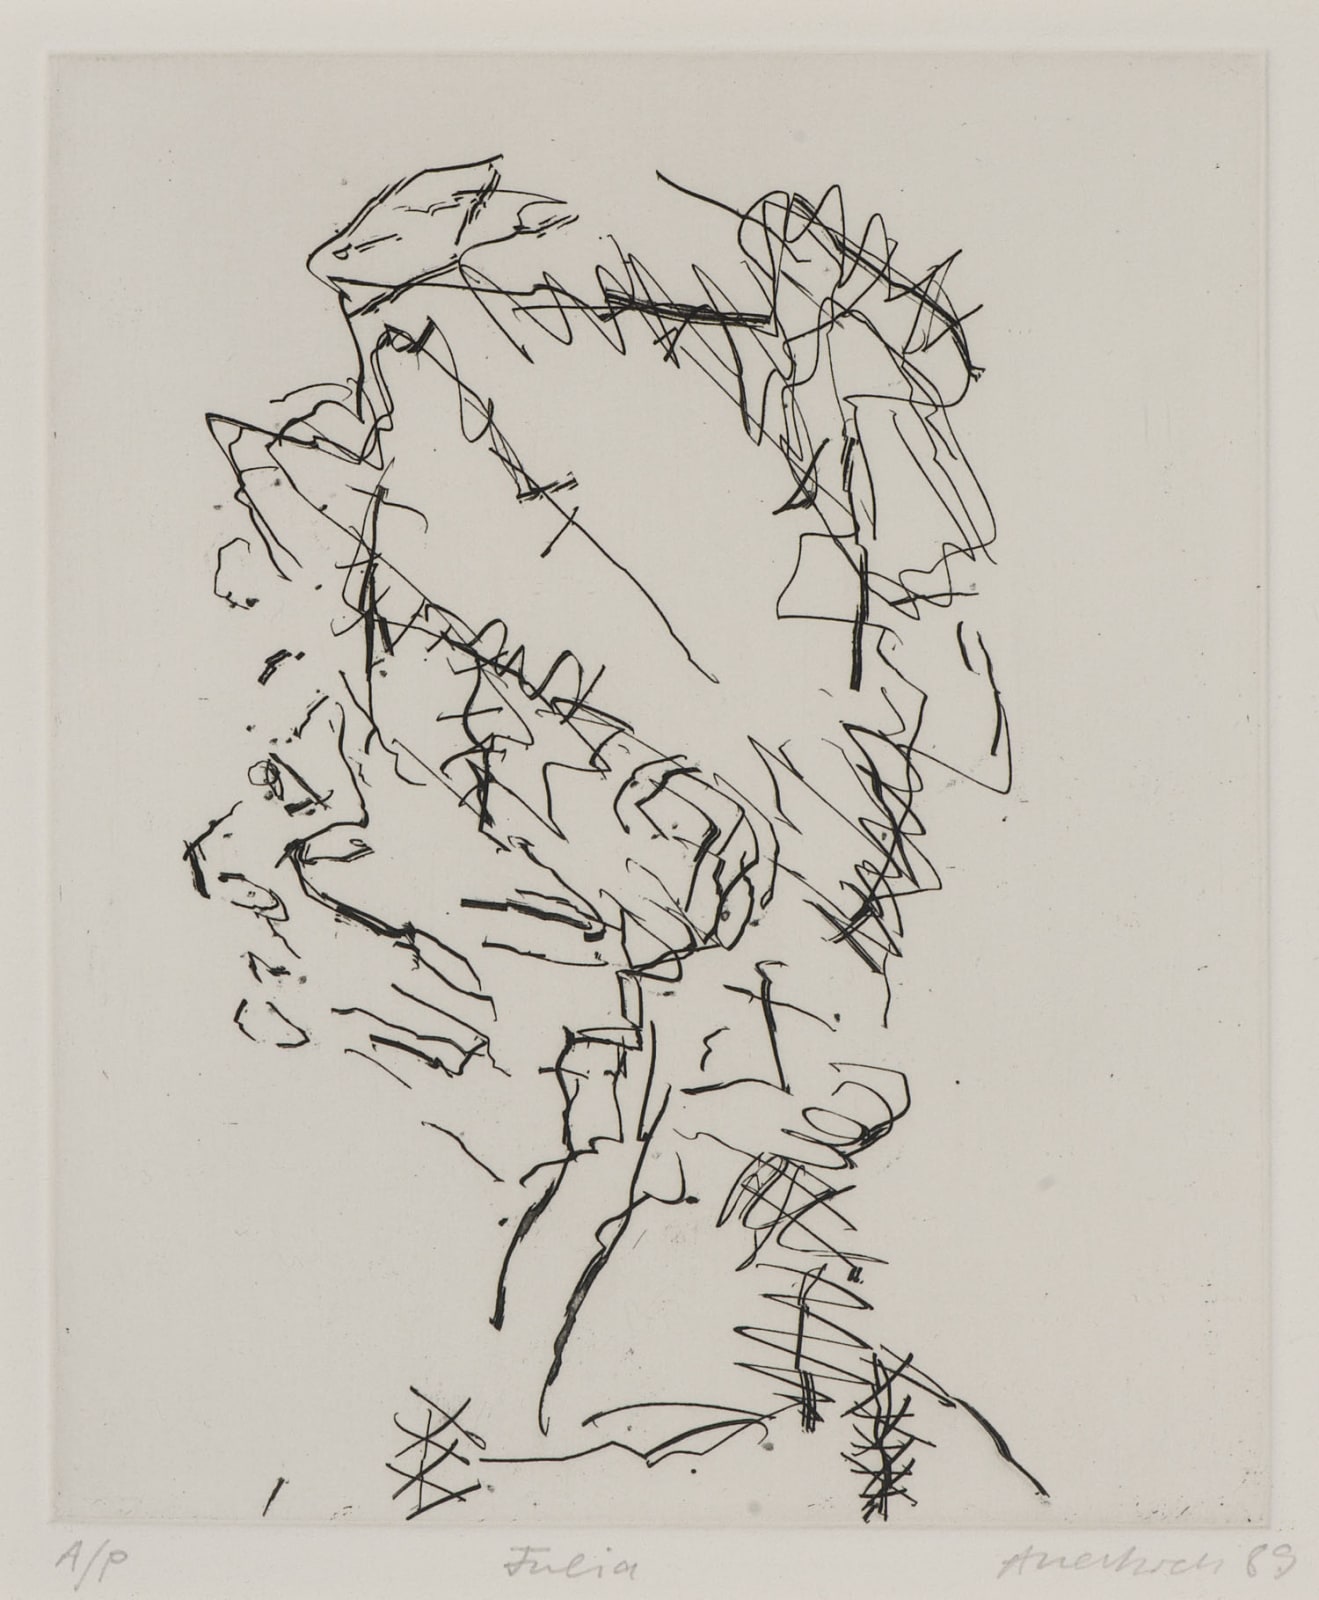 Frank Auerbach (1931-) Julia 1989 Etching, printed on Somerset white paper, artist's proof outside the published edition of 50 19.5 x 16.5 cm Ben Uri Collection © Frank Auerbach, courtesy Marlborough Fine Art To see and discover more about this artist click here